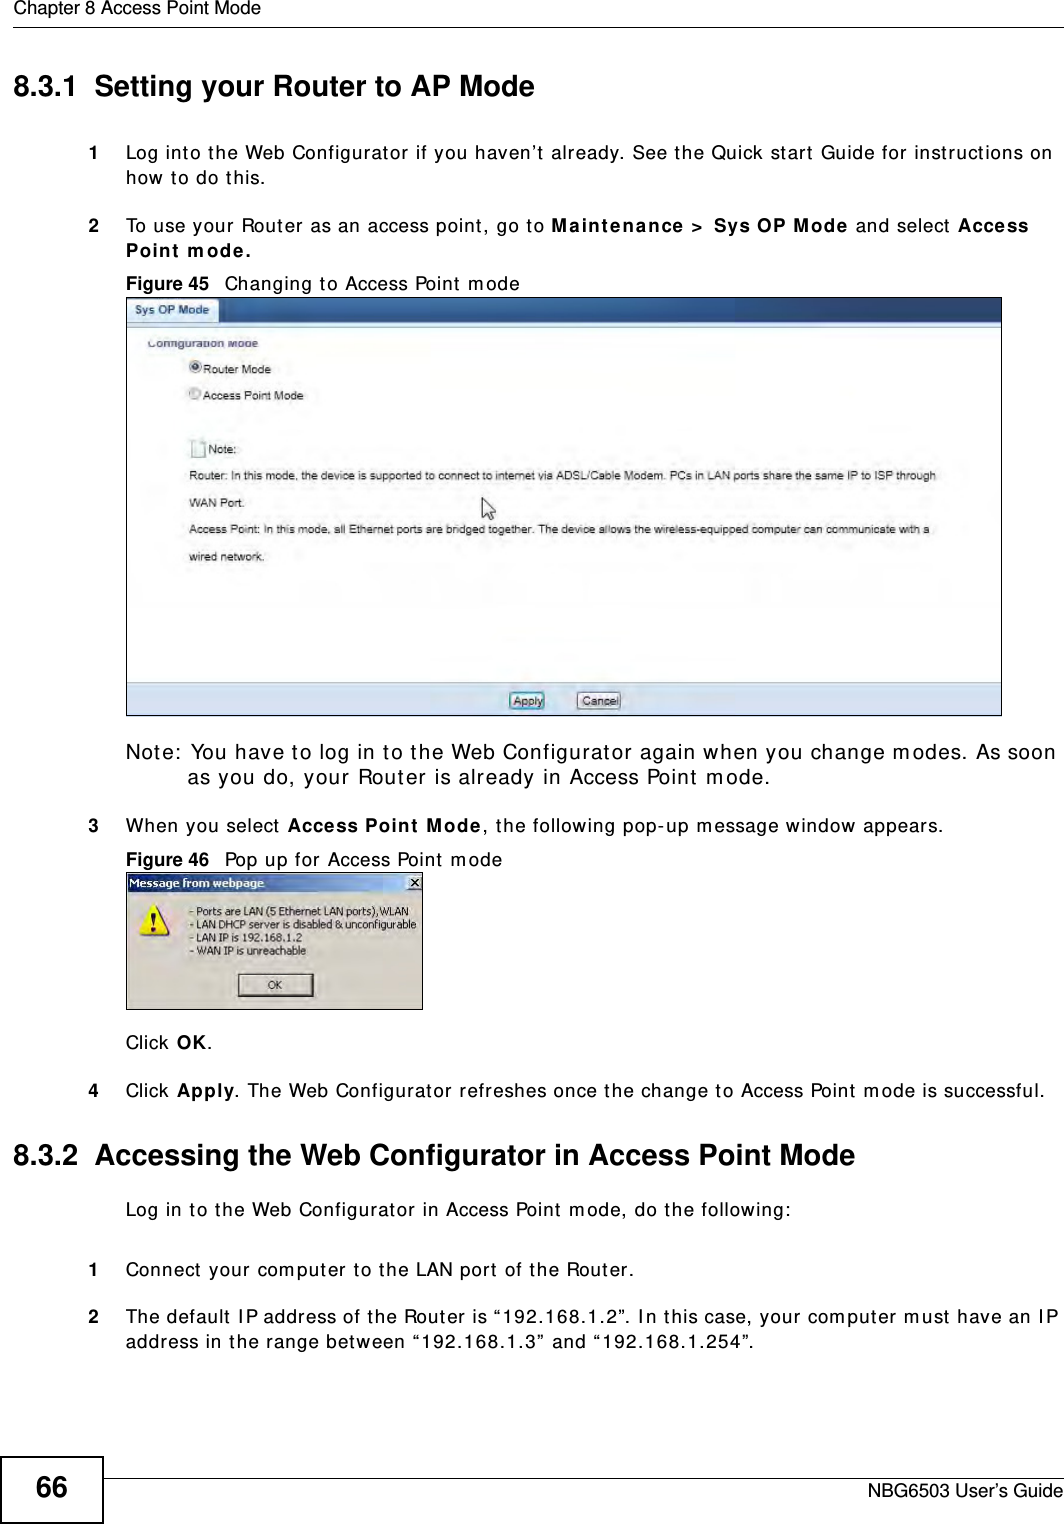 Chapter 8 Access Point ModeNBG6503 User’s Guide668.3.1  Setting your Router to AP Mode1Log into the Web Configurator if you haven’t already. See the Quick start Guide for instructions on how to do this.2To use your Router as an access point, go to Maintenance &gt; Sys OP Mode and select Access Point mode.Figure 45   Changing to Access Point modeNote: You have to log in to the Web Configurator again when you change modes. As soon as you do, your Router is already in Access Point mode.3When you select Access Point Mode, the following pop-up message window appears.Figure 46   Pop up for Access Point mode Click OK.4Click Apply. The Web Configurator refreshes once the change to Access Point mode is successful.8.3.2  Accessing the Web Configurator in Access Point ModeLog in to the Web Configurator in Access Point mode, do the following:1Connect your computer to the LAN port of the Router. 2The default IP address of the Router is “192.168.1.2”. In this case, your computer must have an IP address in the range between “192.168.1.3” and “192.168.1.254”.